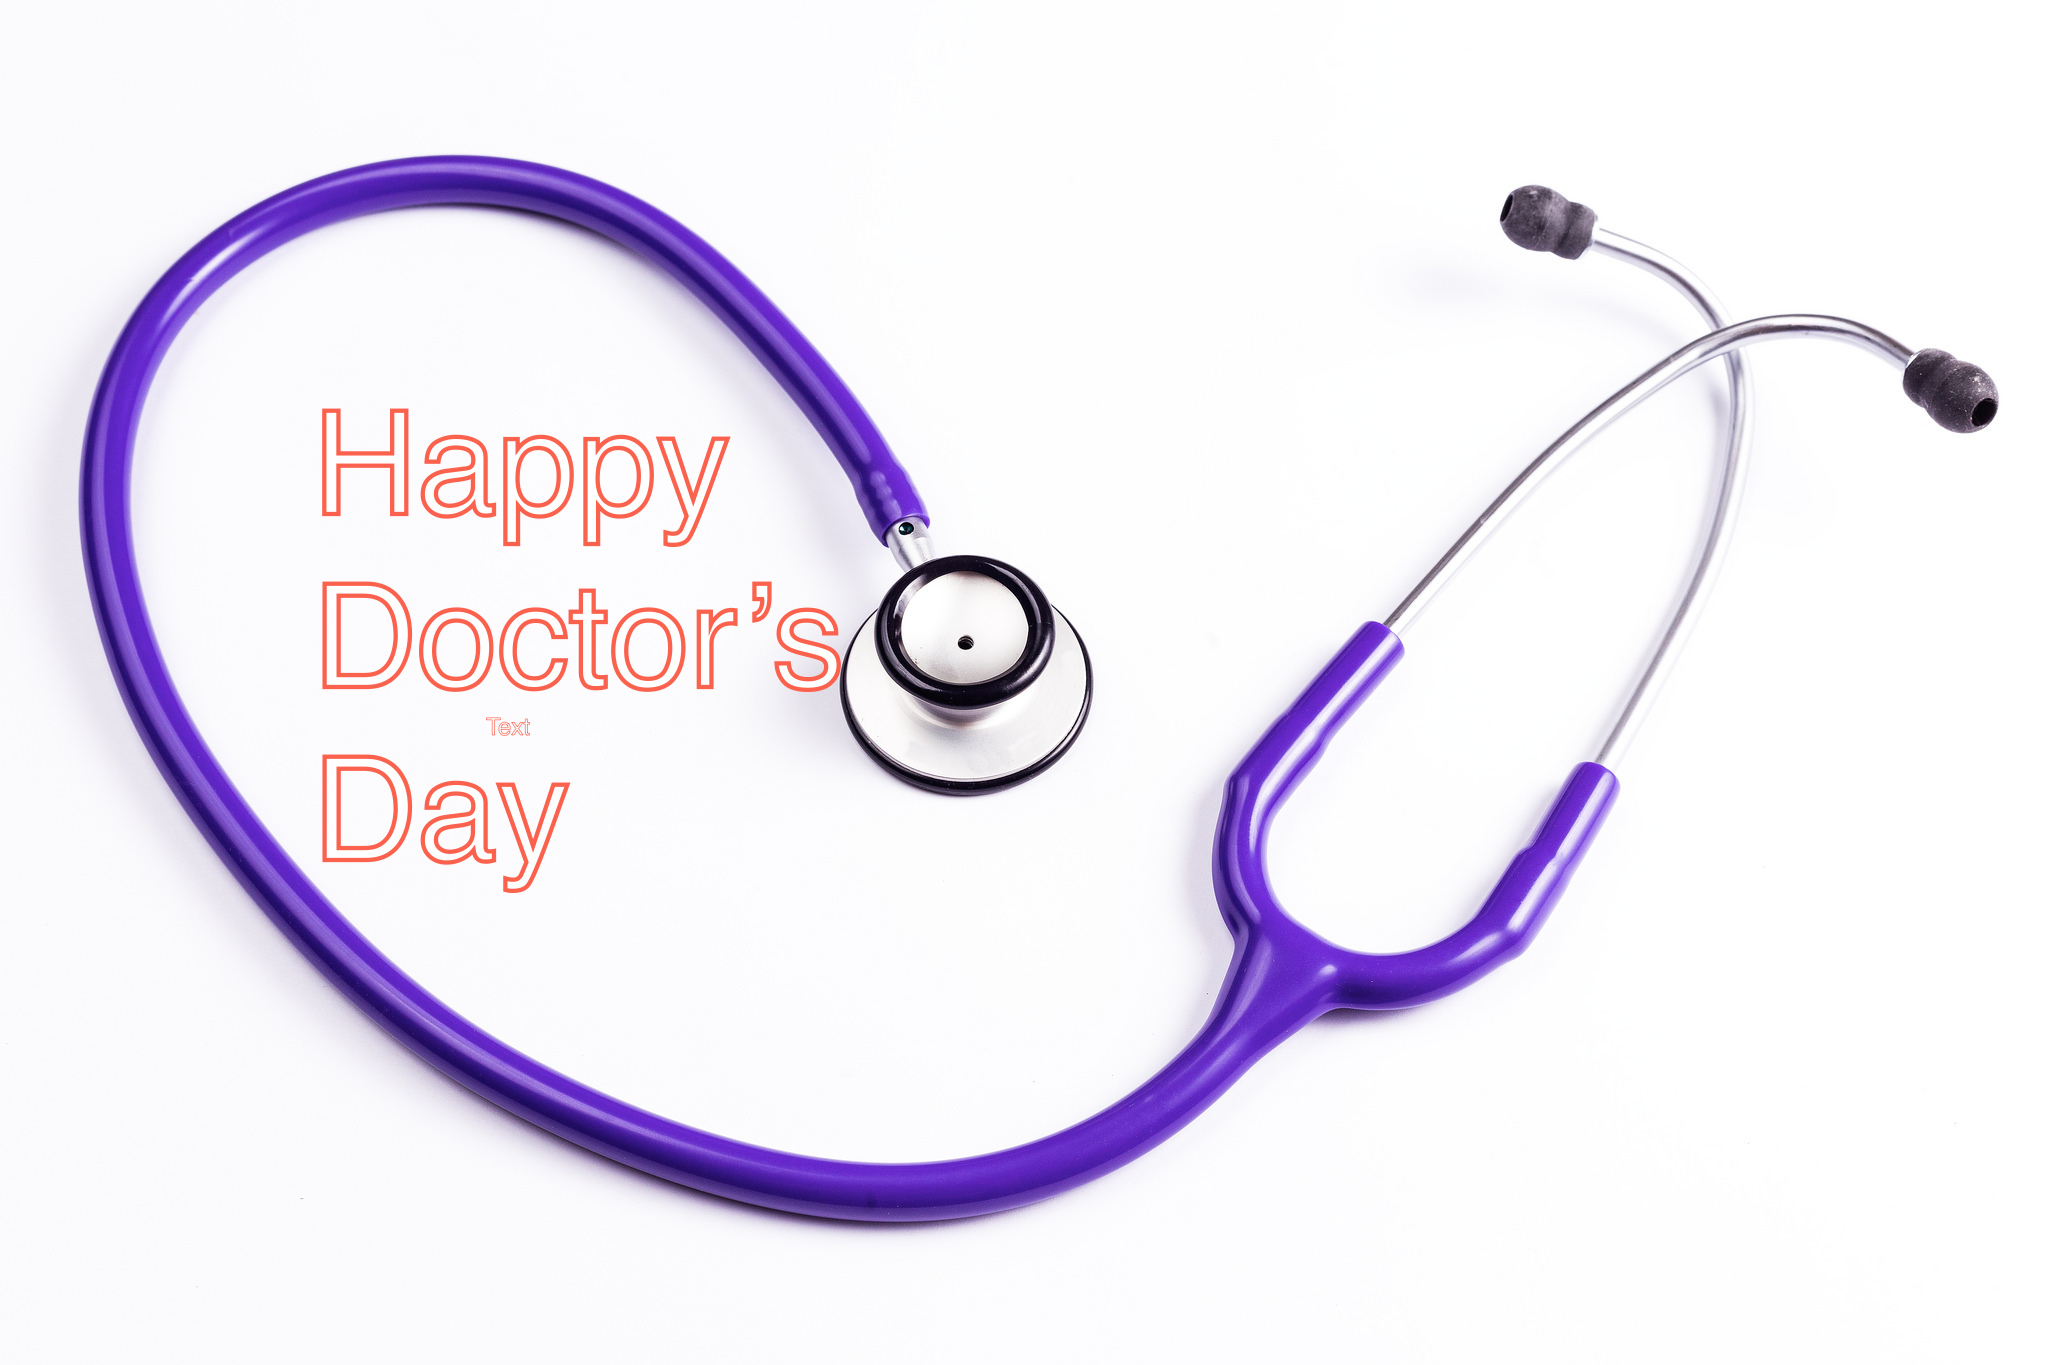 Doctor's Day Picture, Image, Photo